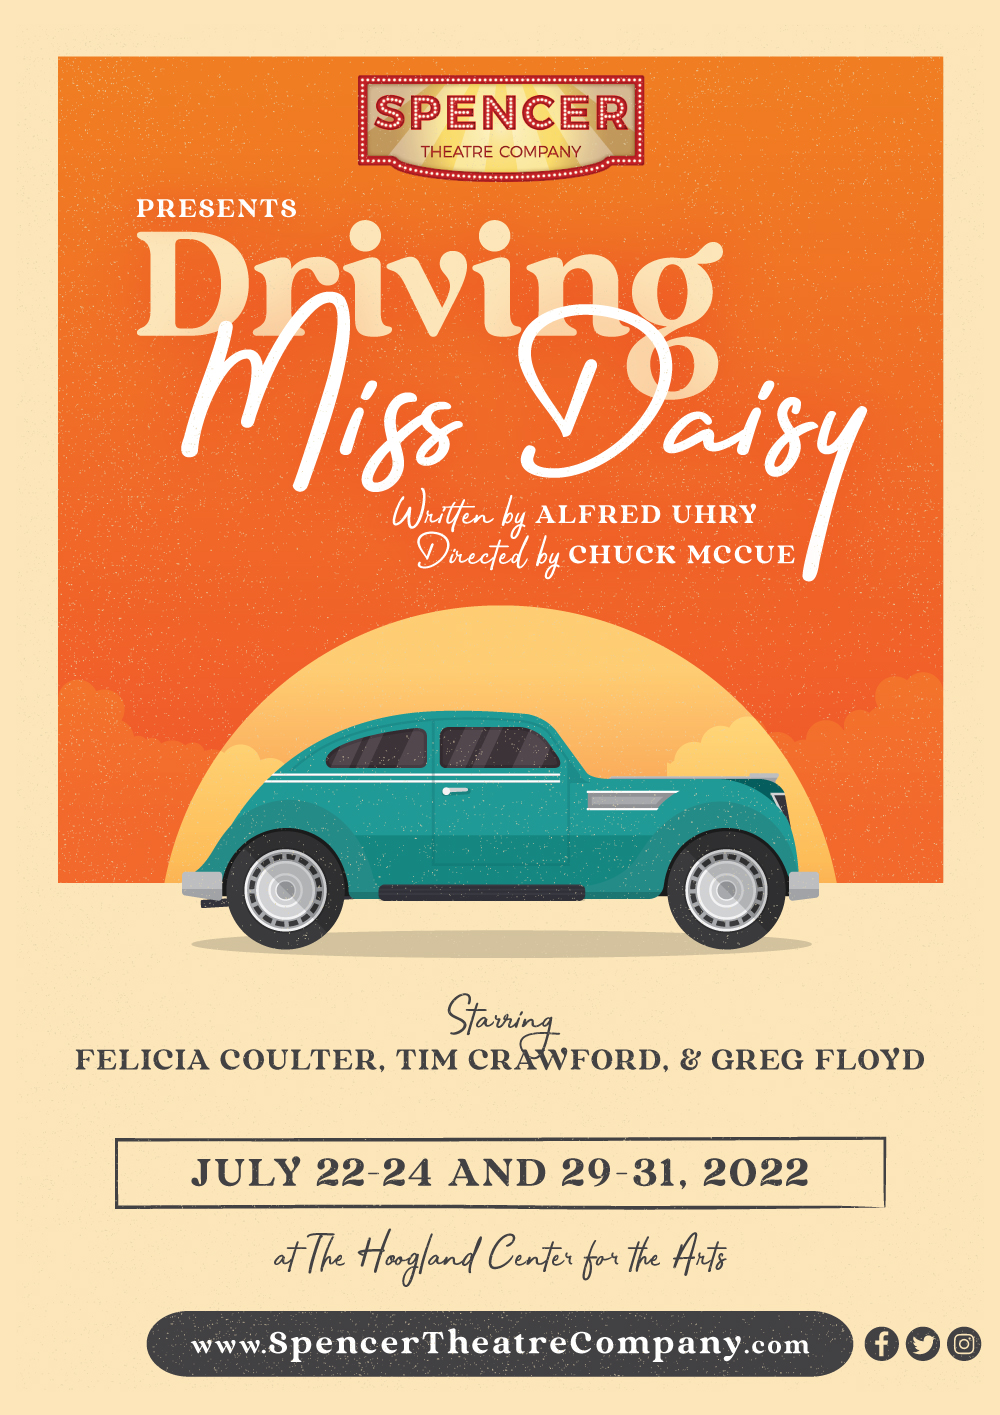 Driving Miss Daisy July 22-24 & 29-31, 2022